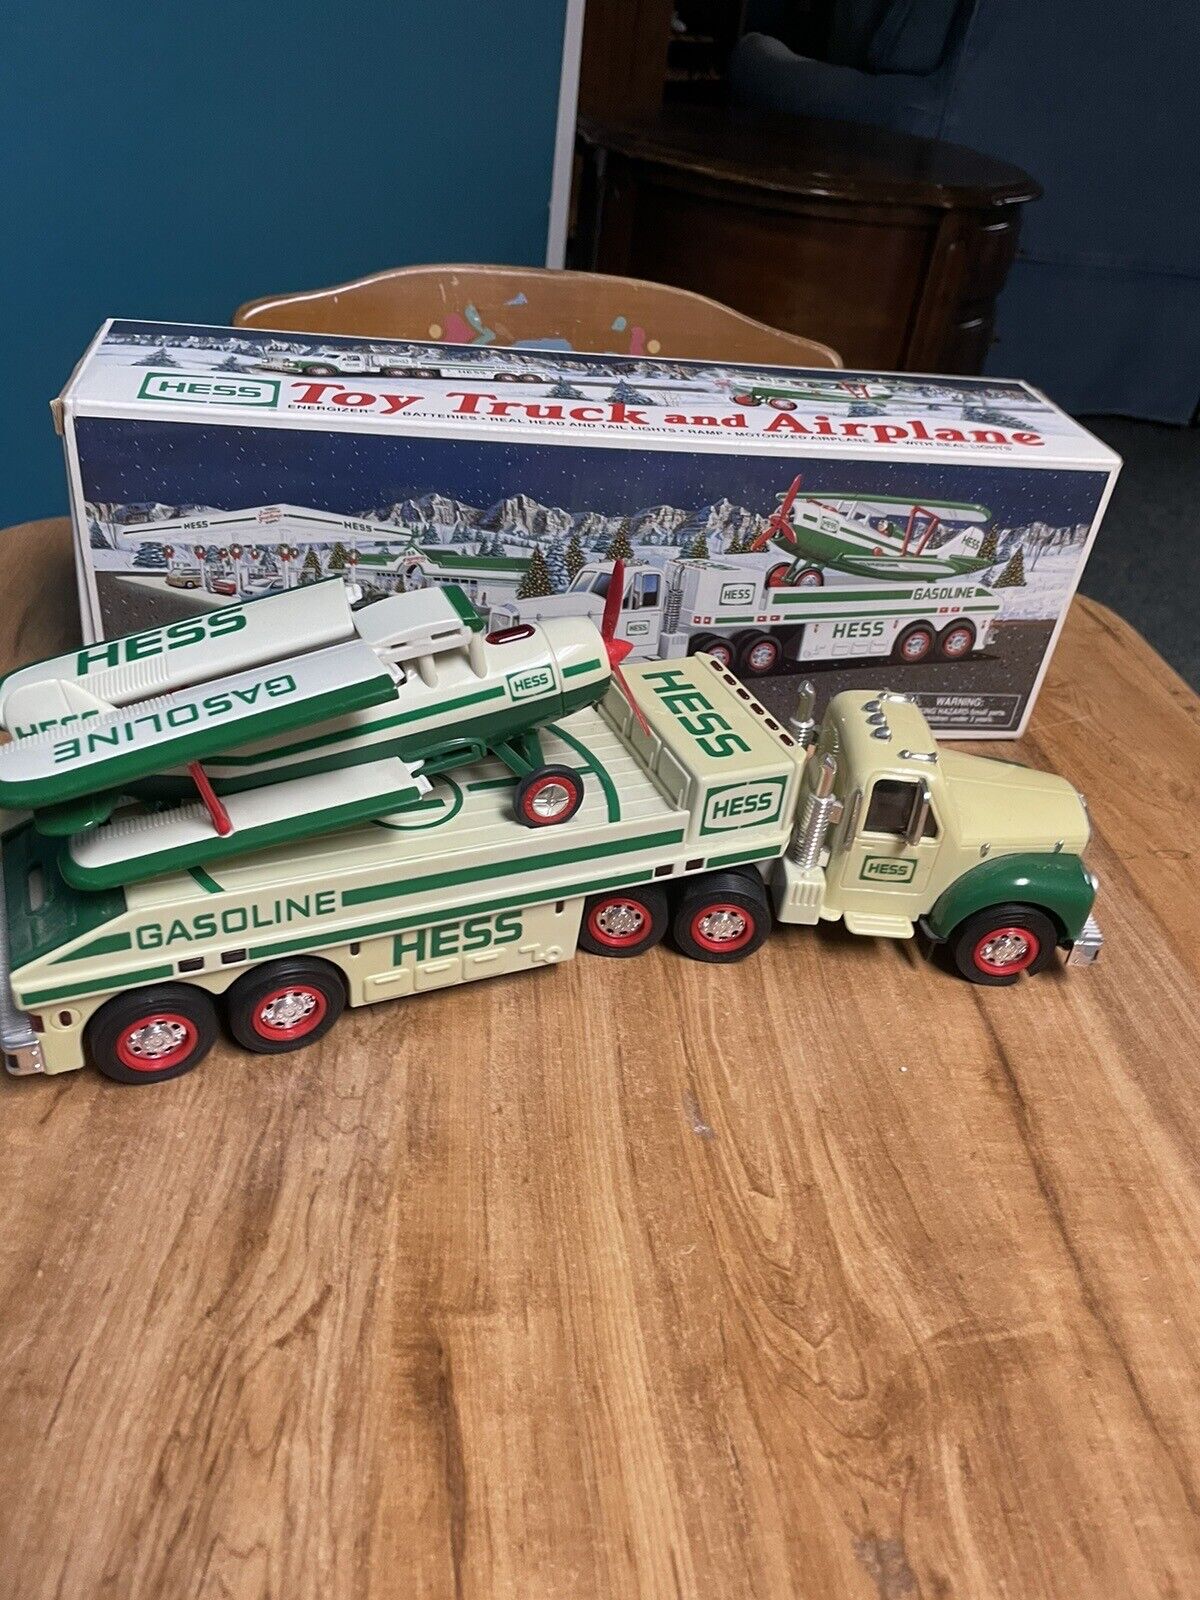 2002 Hess Toy Truck and Airplane With Original Box & packaging. Works